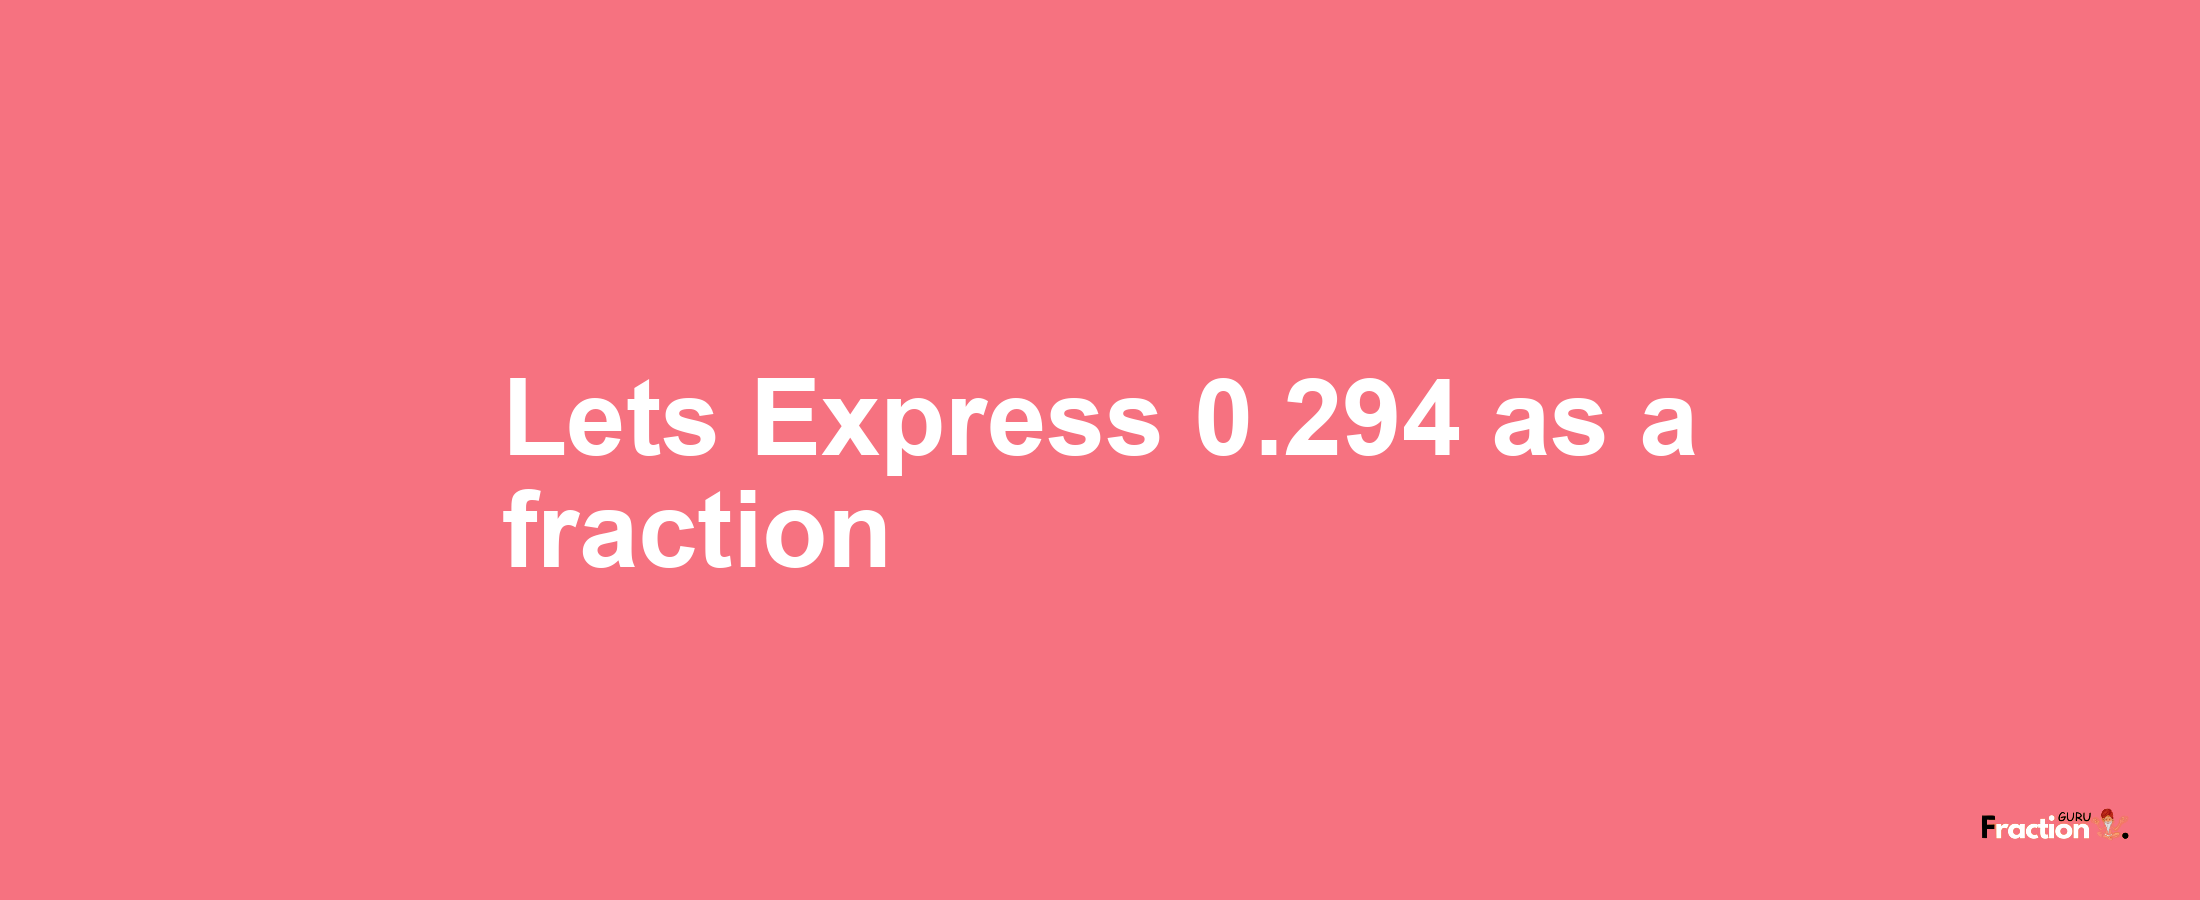 Lets Express 0.294 as afraction